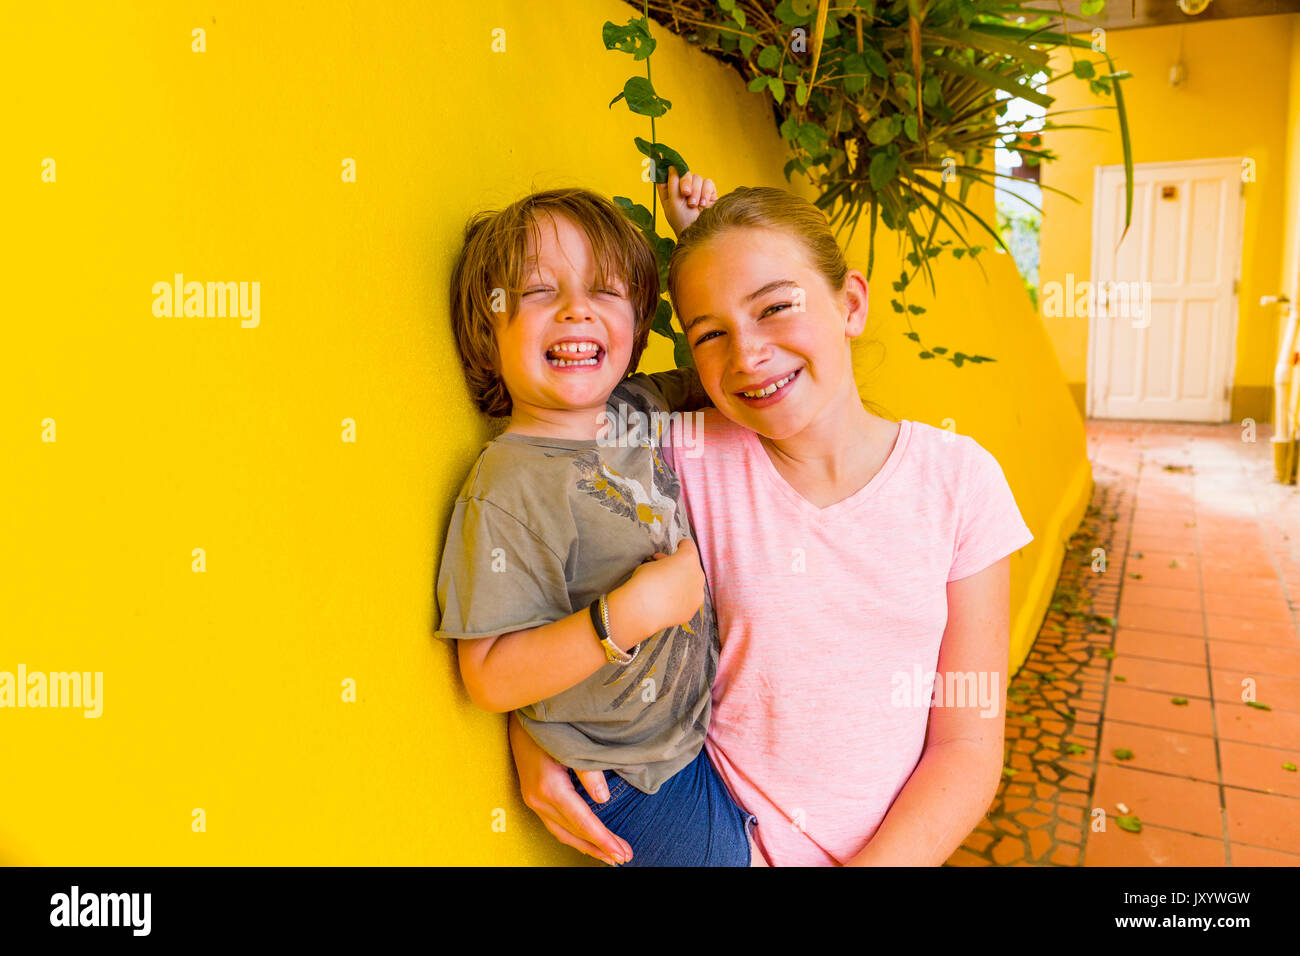 Caucasian girl leaning on yellow wall holding brother Stock Photo